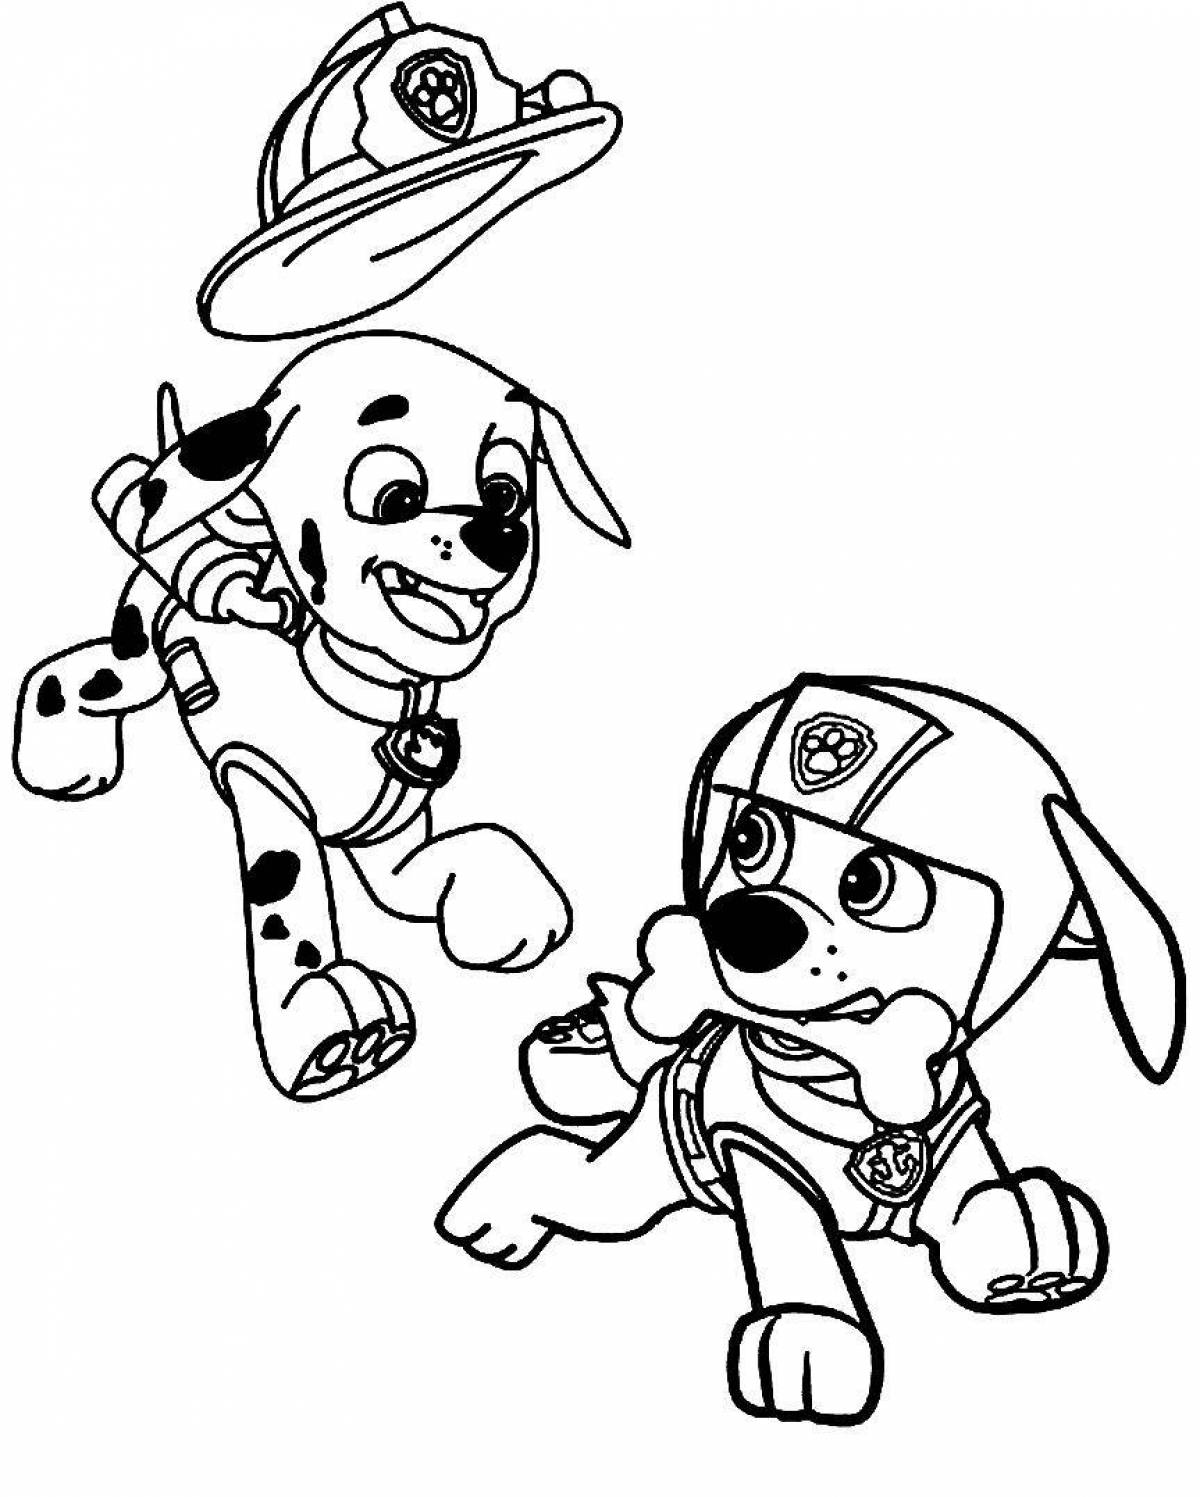 Coloring page amazing marshal and racer